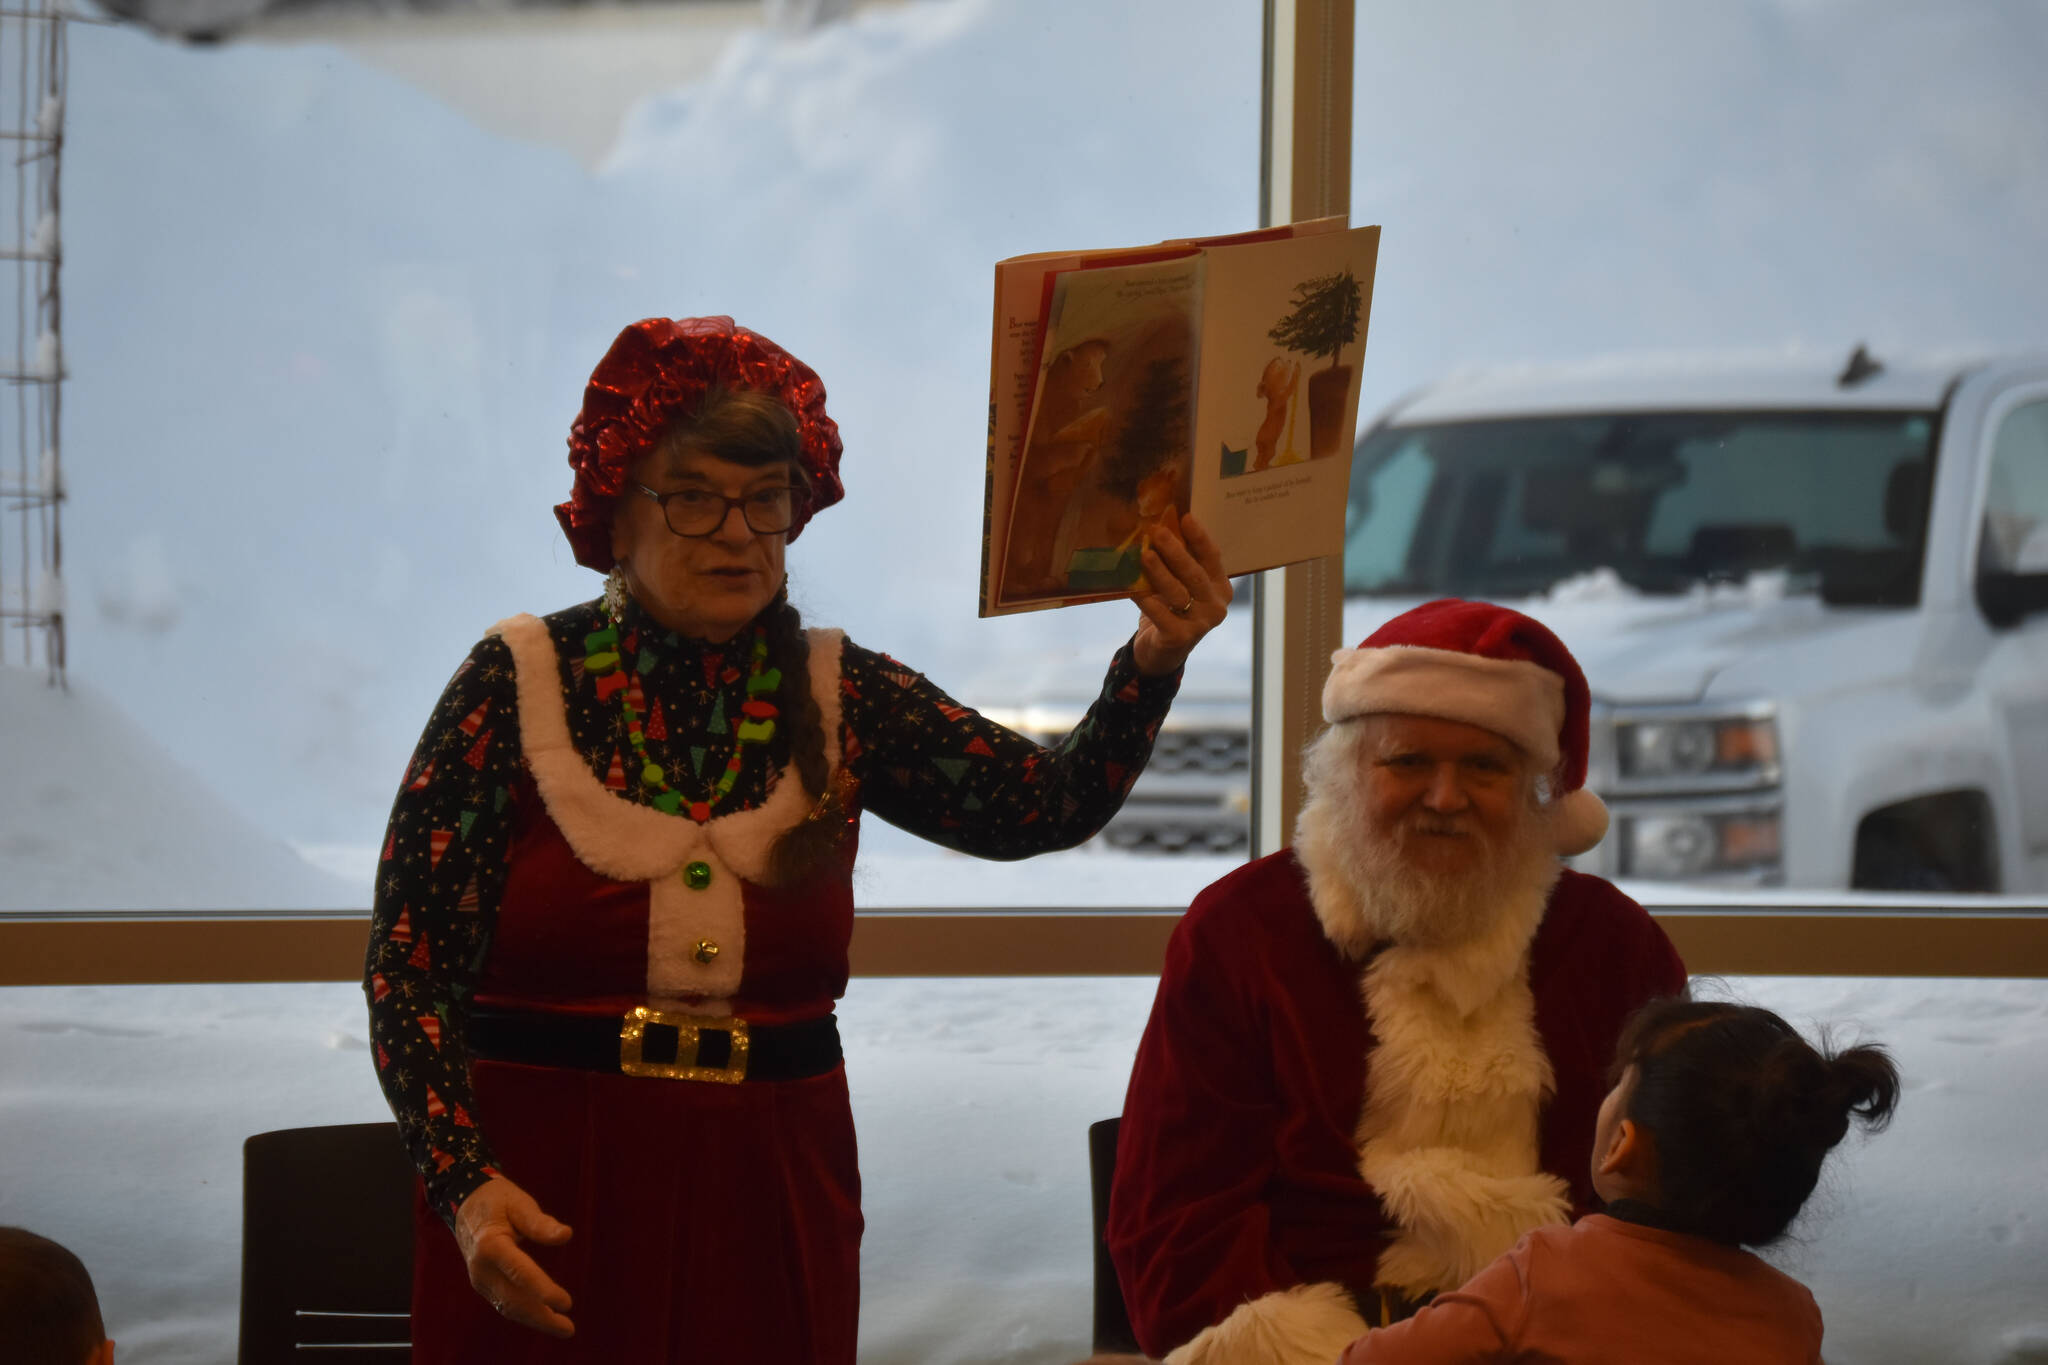 Mrs. Claus, played by Kit Hill, shows the pictures in her storybook to the kids during Story Time with Mrs. Claus at the Kenai Community Library in Kenai, Alaska, on Monday, Dec. 19, 2022. (Jake Dye/Peninsula Clarion)